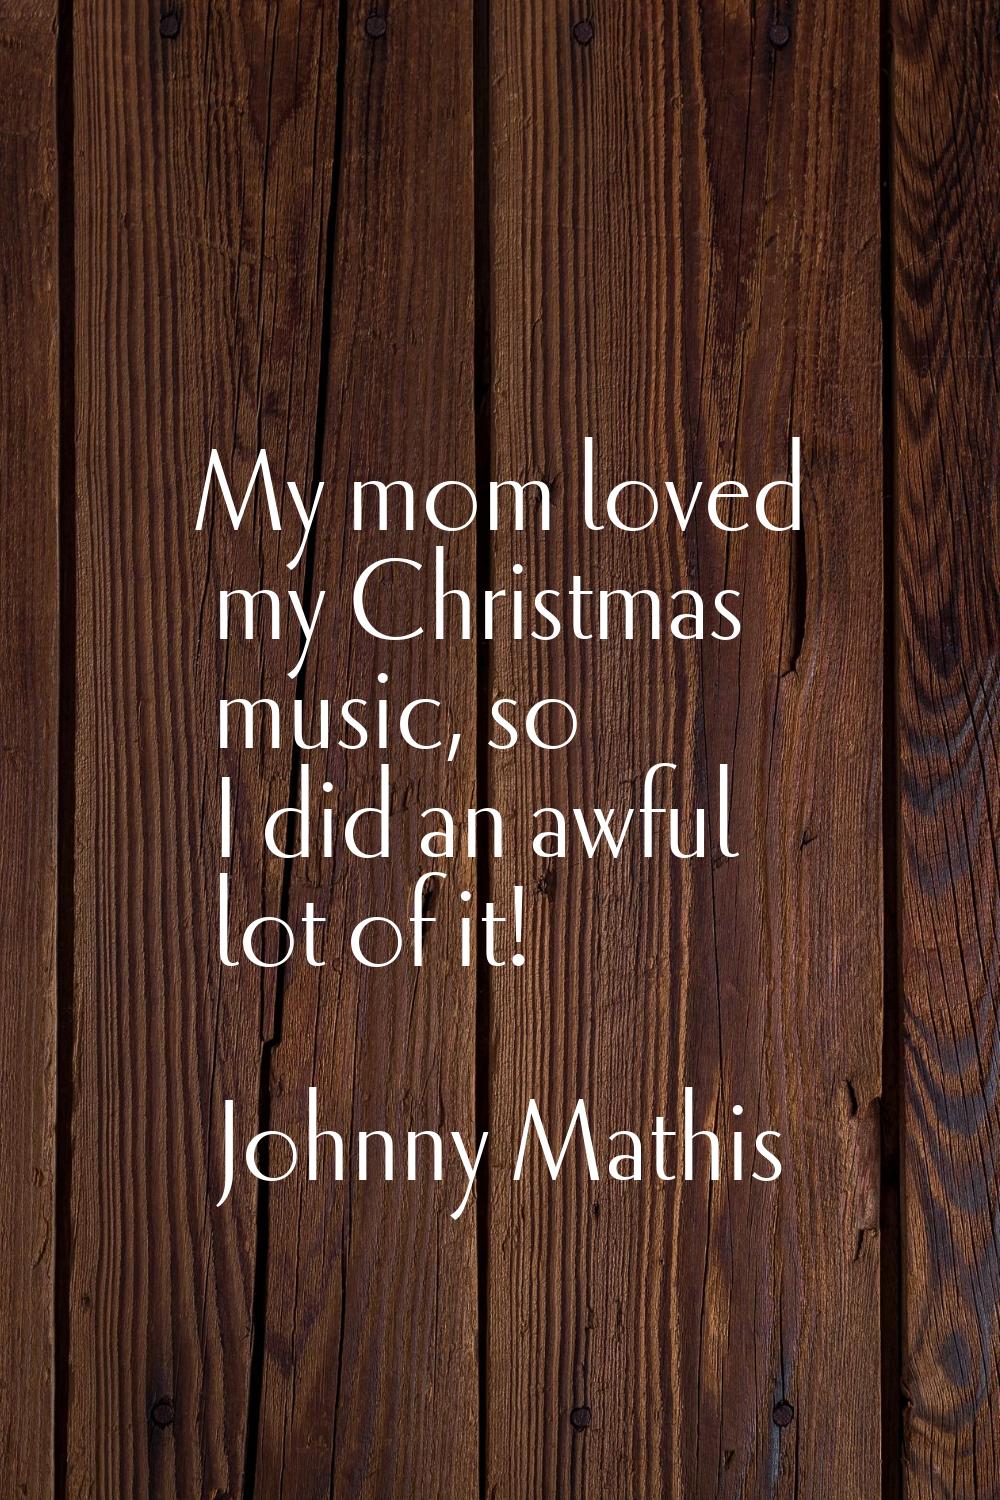 My mom loved my Christmas music, so I did an awful lot of it!